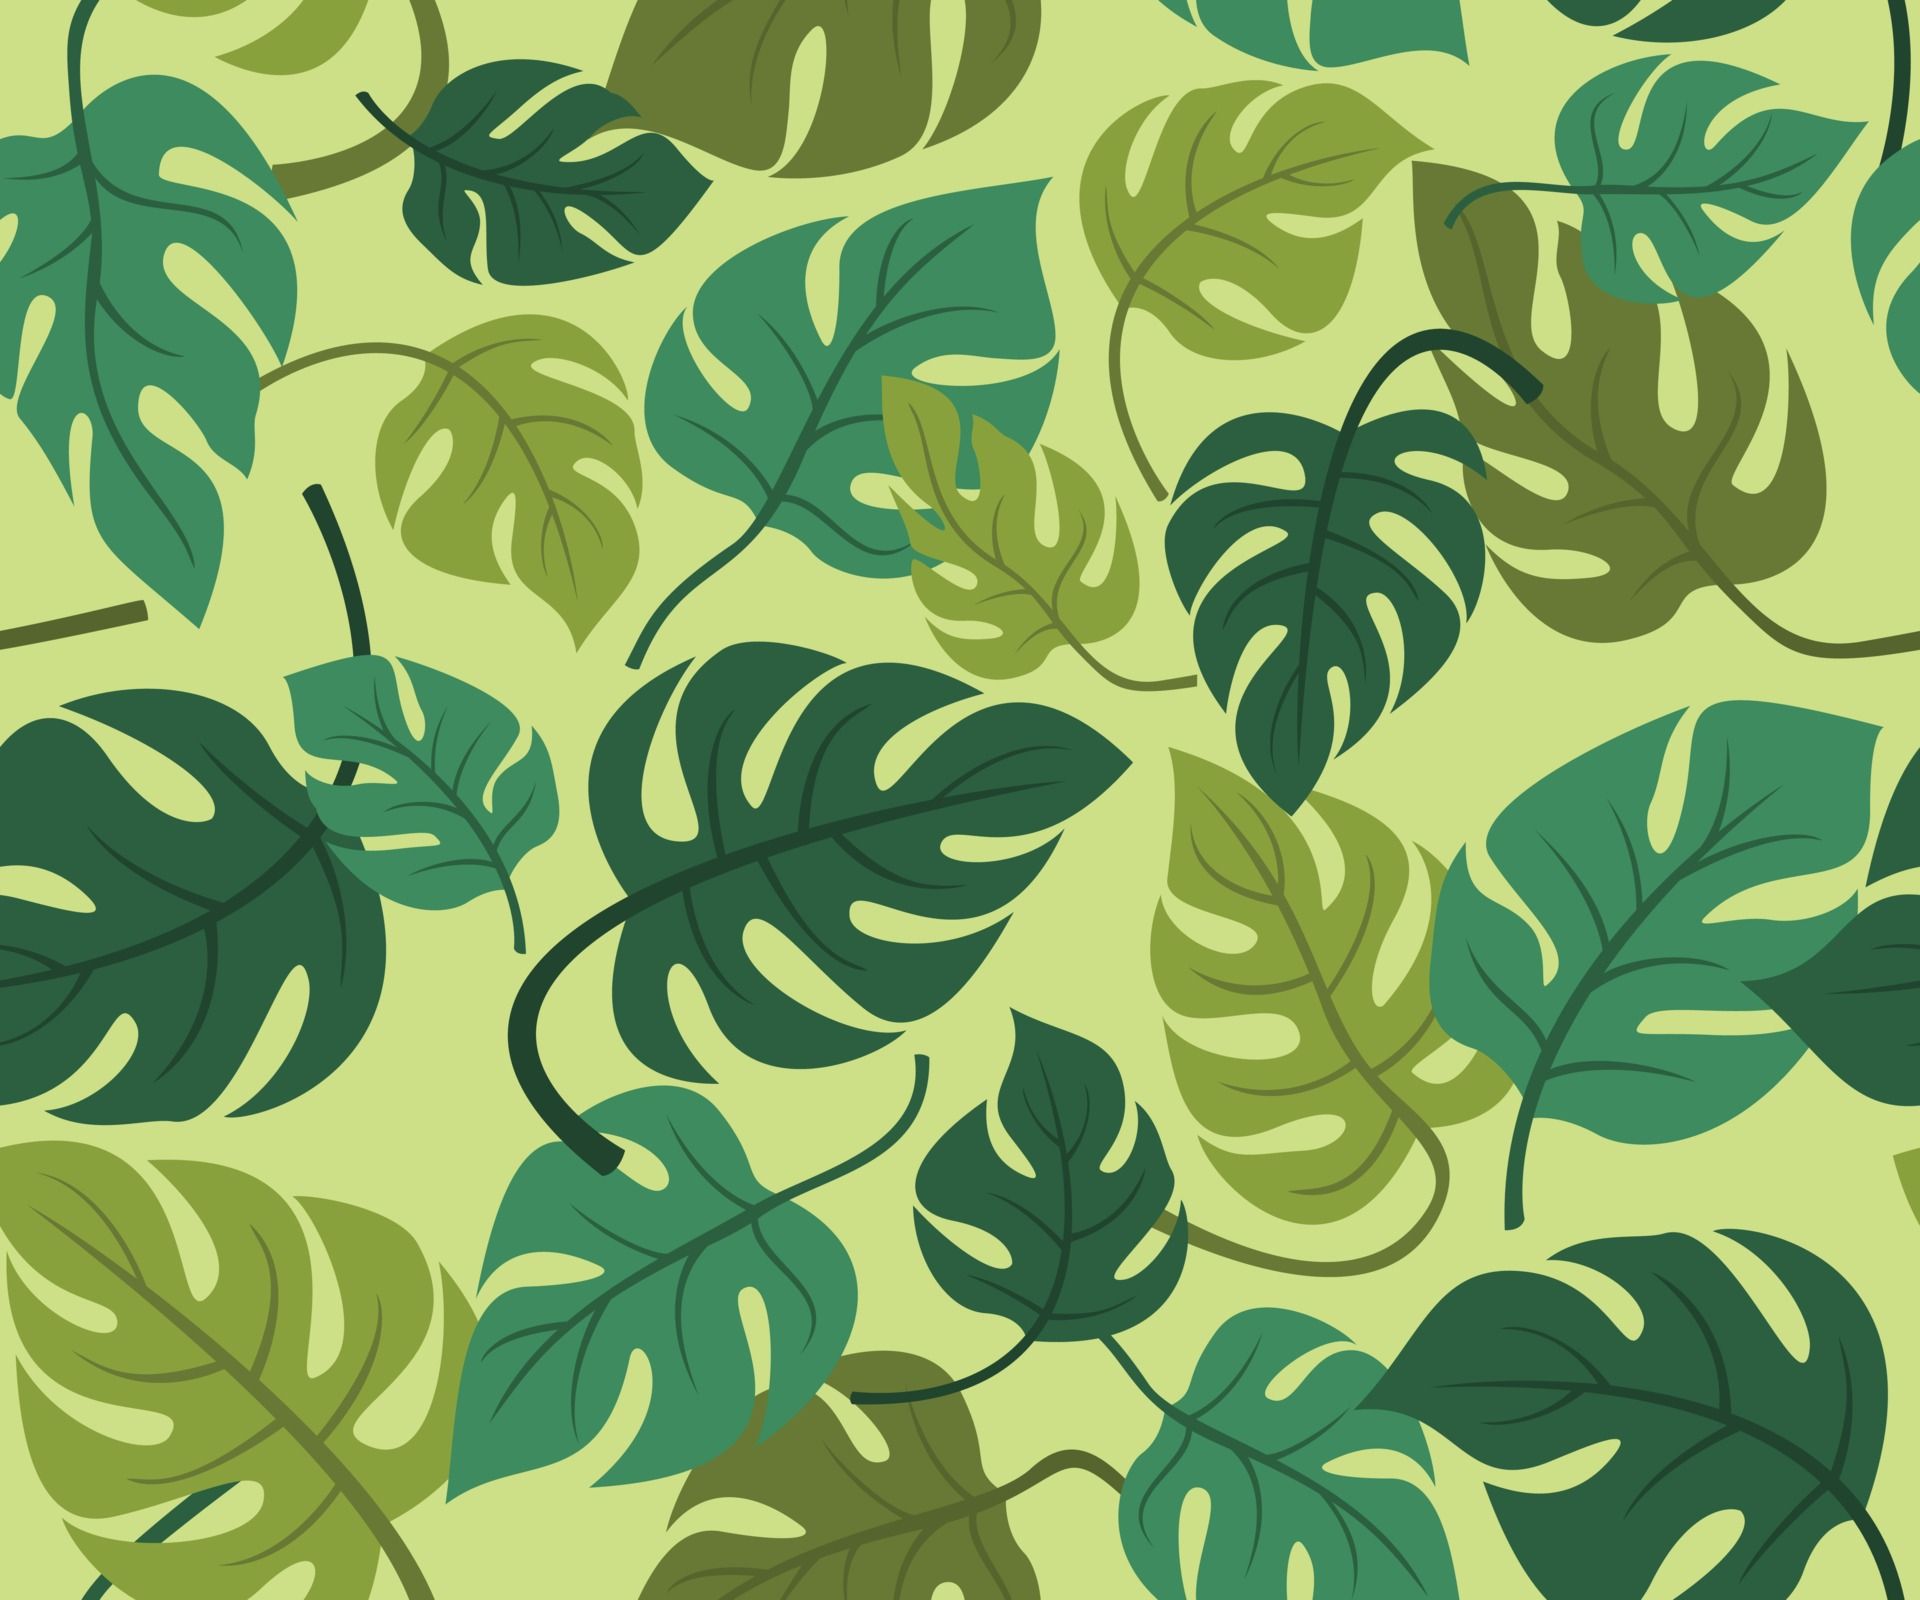 A green and brown leafy pattern - Monstera